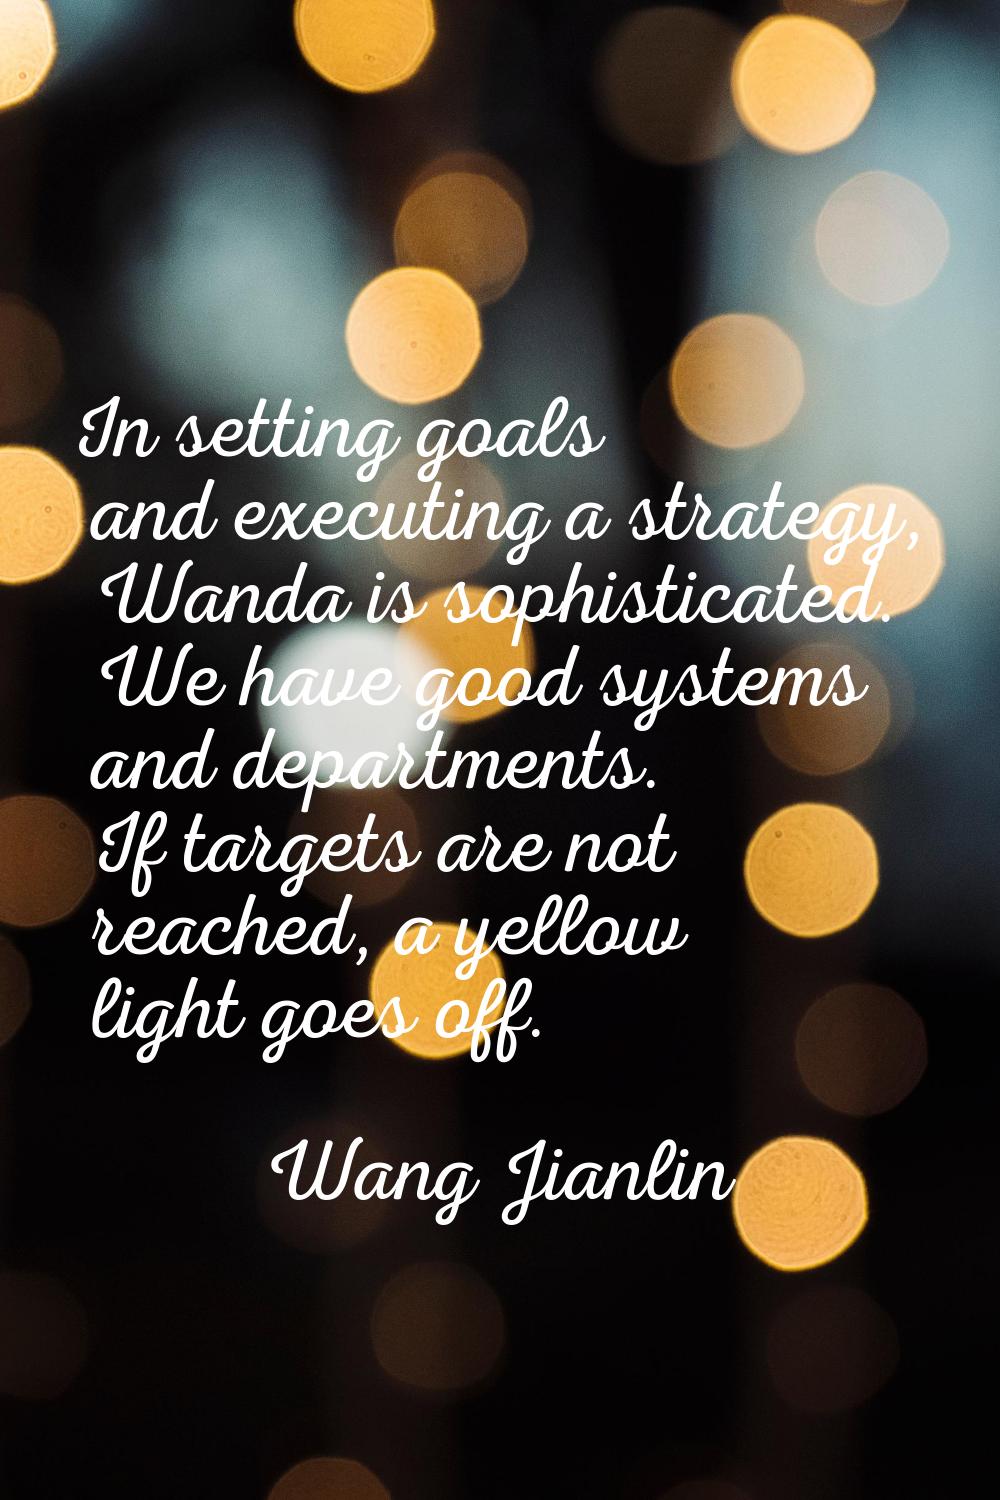 In setting goals and executing a strategy, Wanda is sophisticated. We have good systems and departm